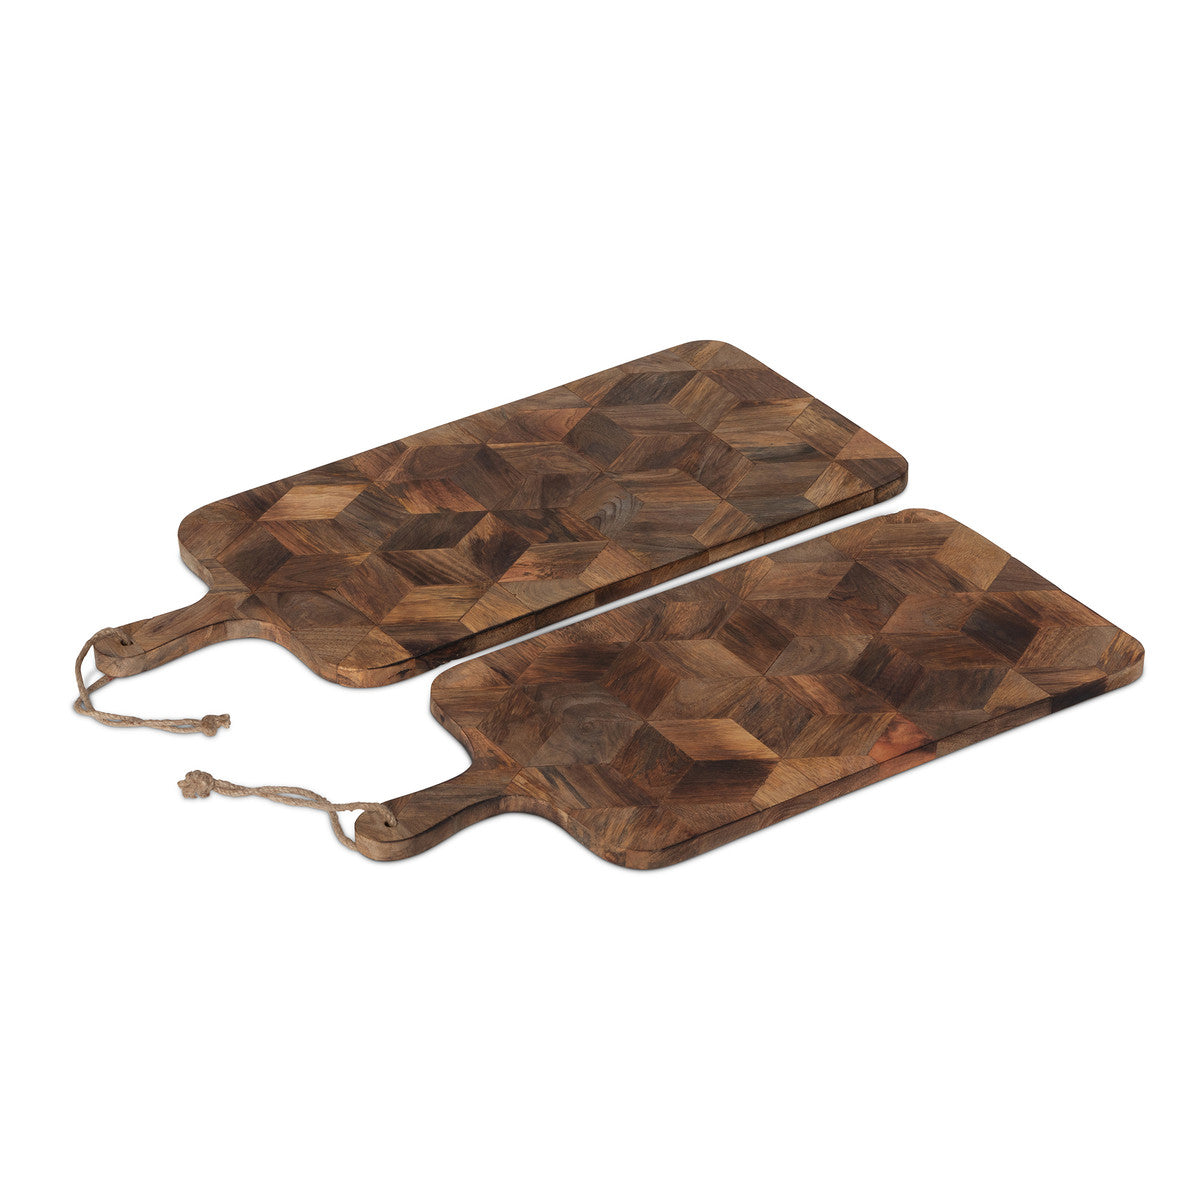 Patterned Wood Chopping Board, Set of 2